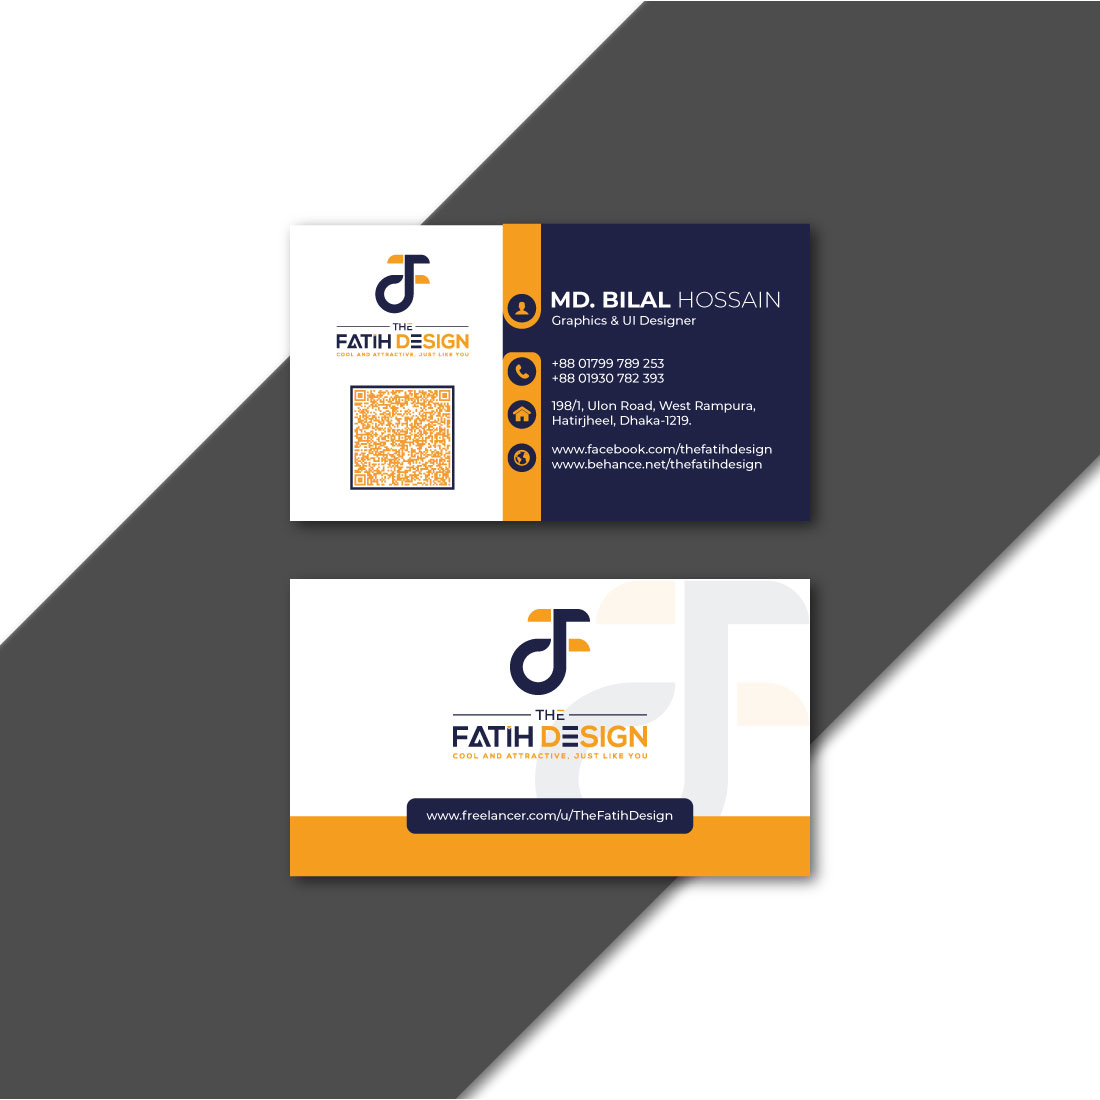 Creative Professional and Elegant Business Card Design cover image.